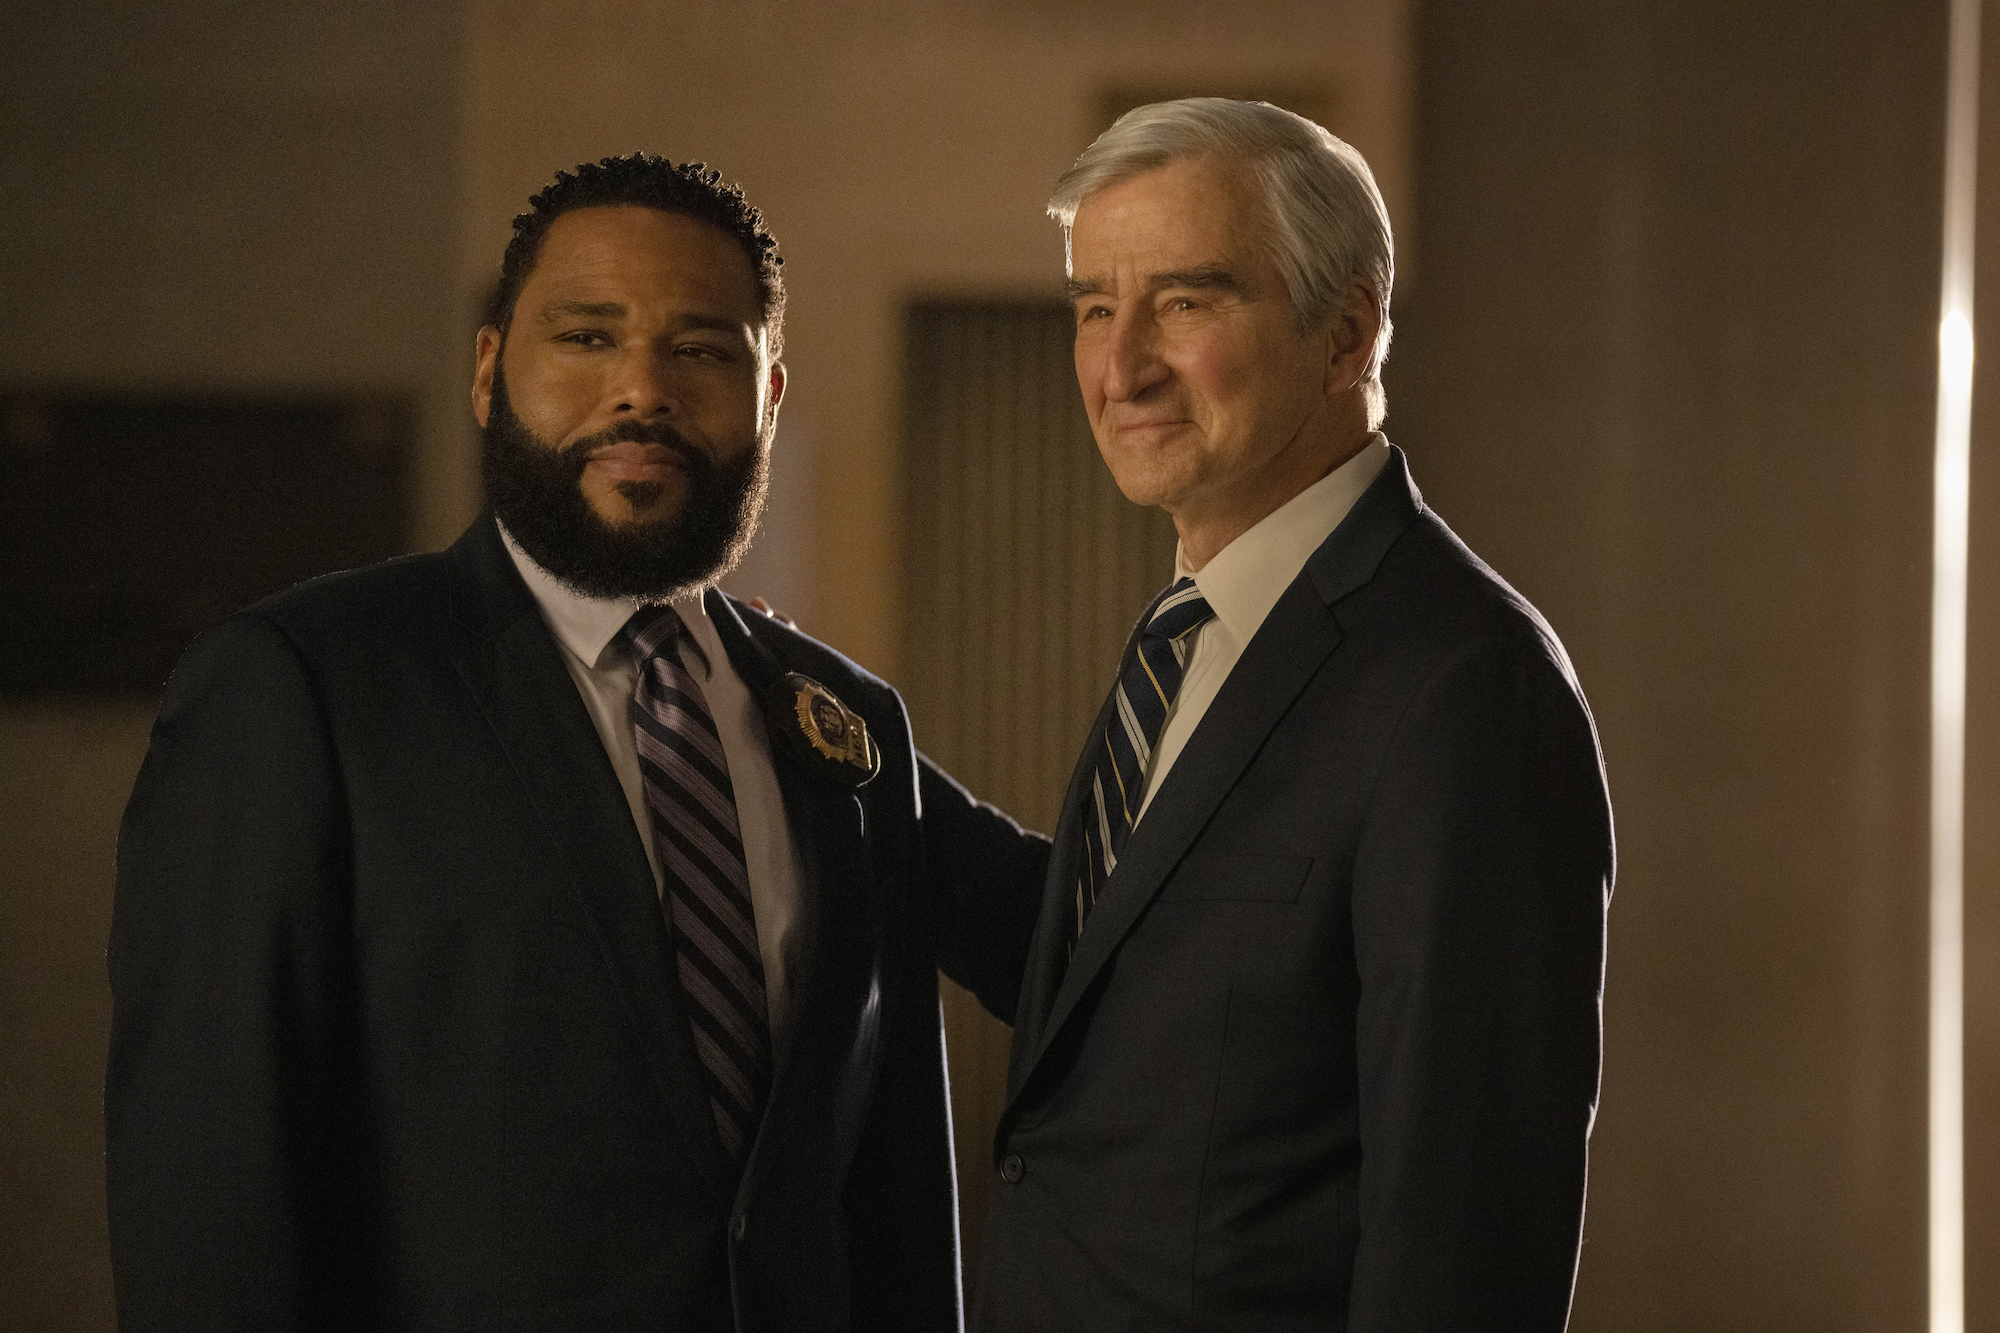 'Law & Order' star Sam Waterston puts his arm around Anthony Anderson